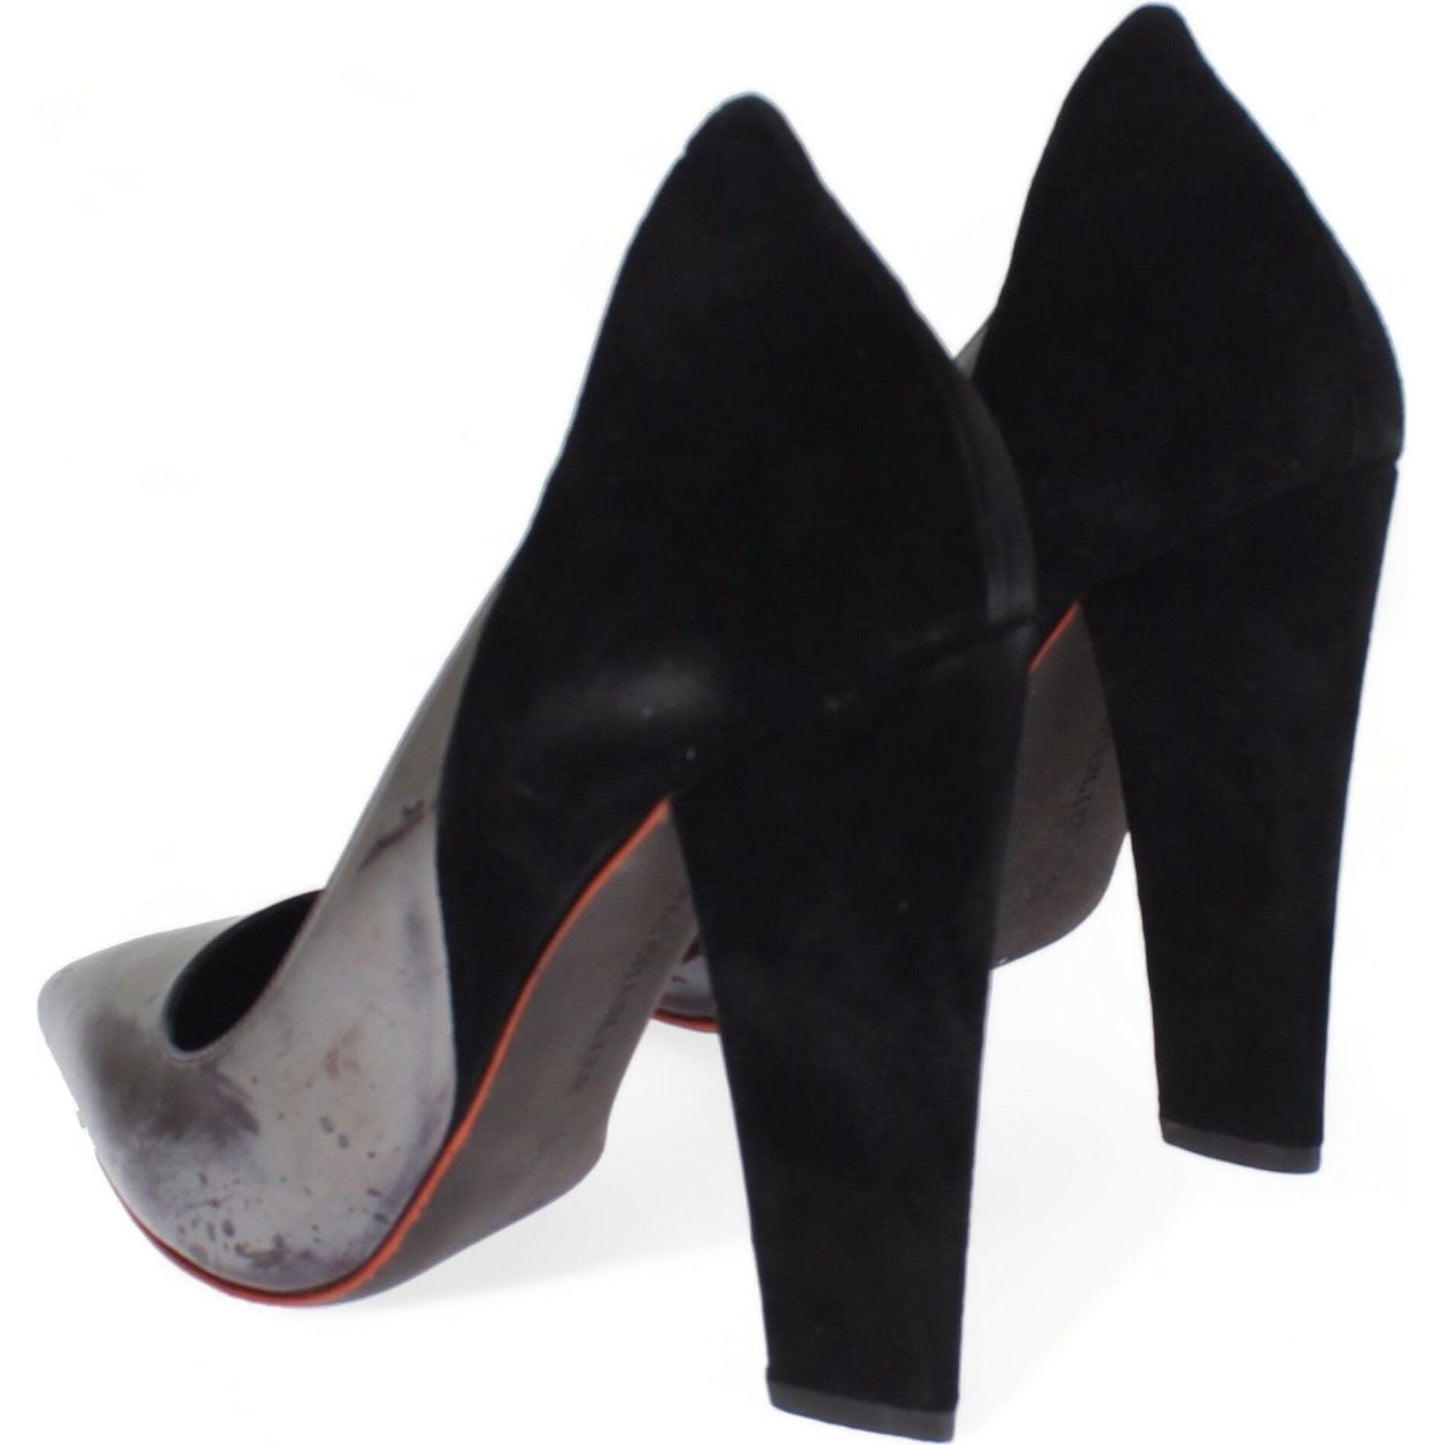 Cédric Charlier Chic Metallic Gray Leather Pumps gray-black-leather-suede-heels-pumps-shoes